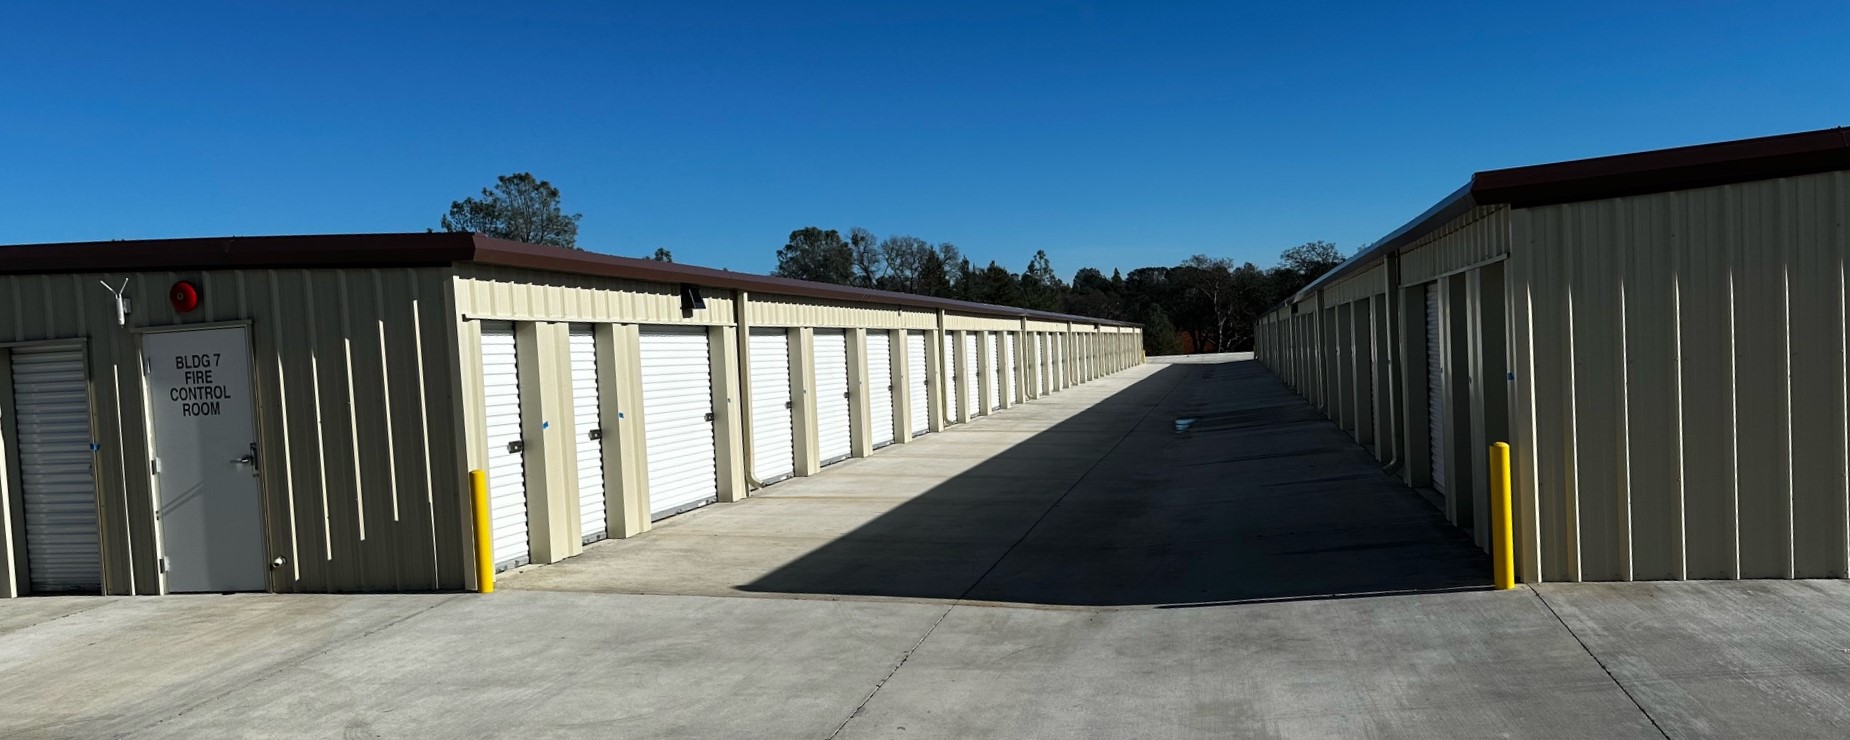 Leave It To Us Storage - Camerson Park CA 95682